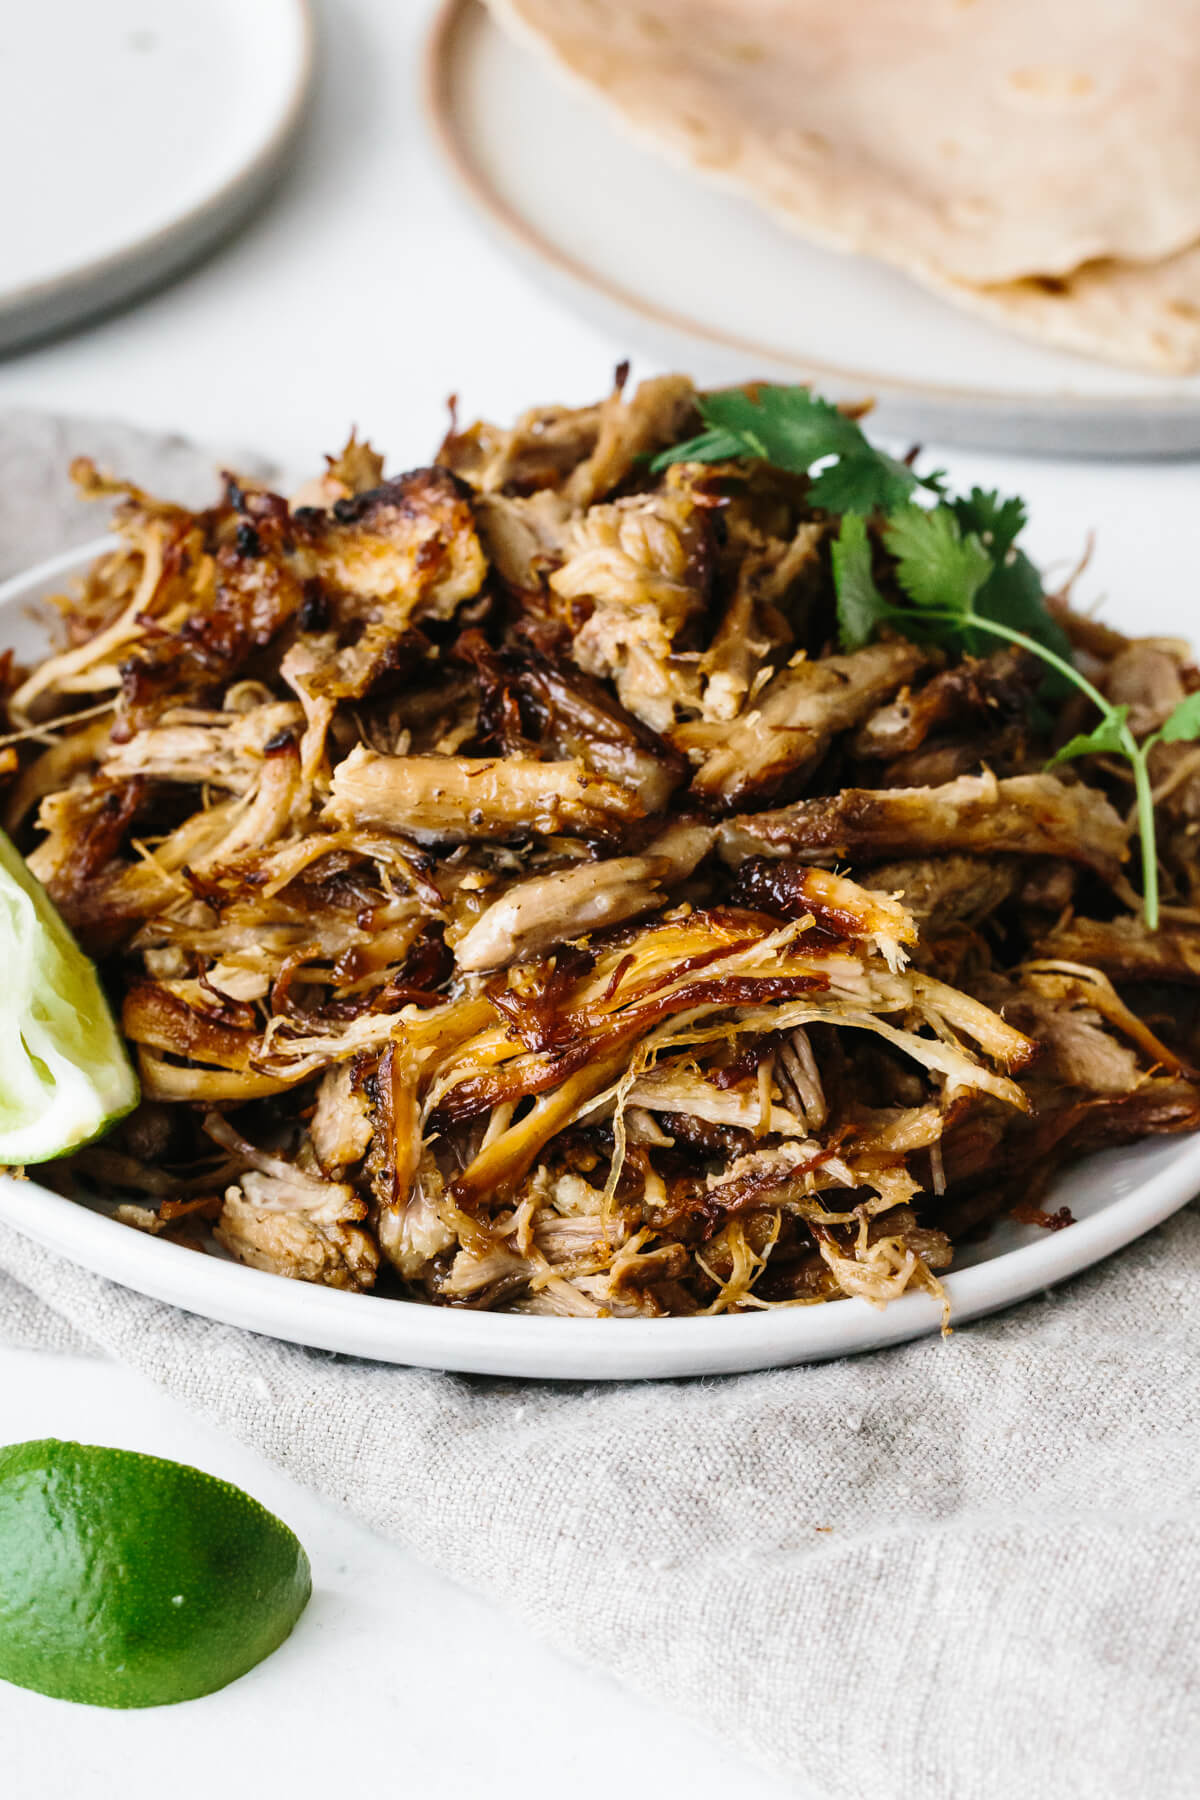 A pile of carnitas on a serving plate.